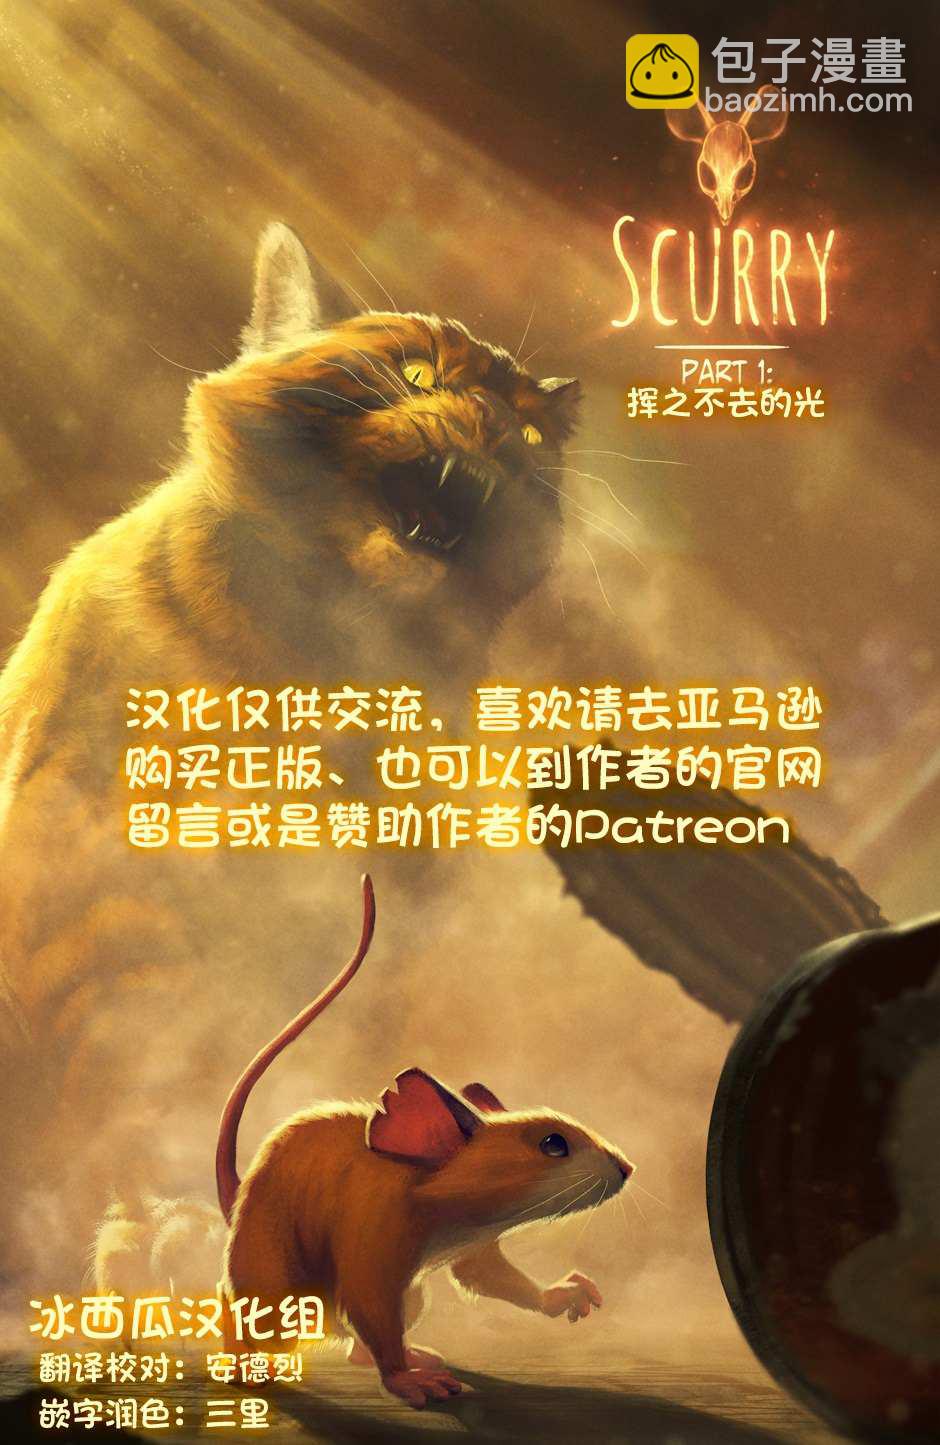 Scurry - 第1卷 - 2